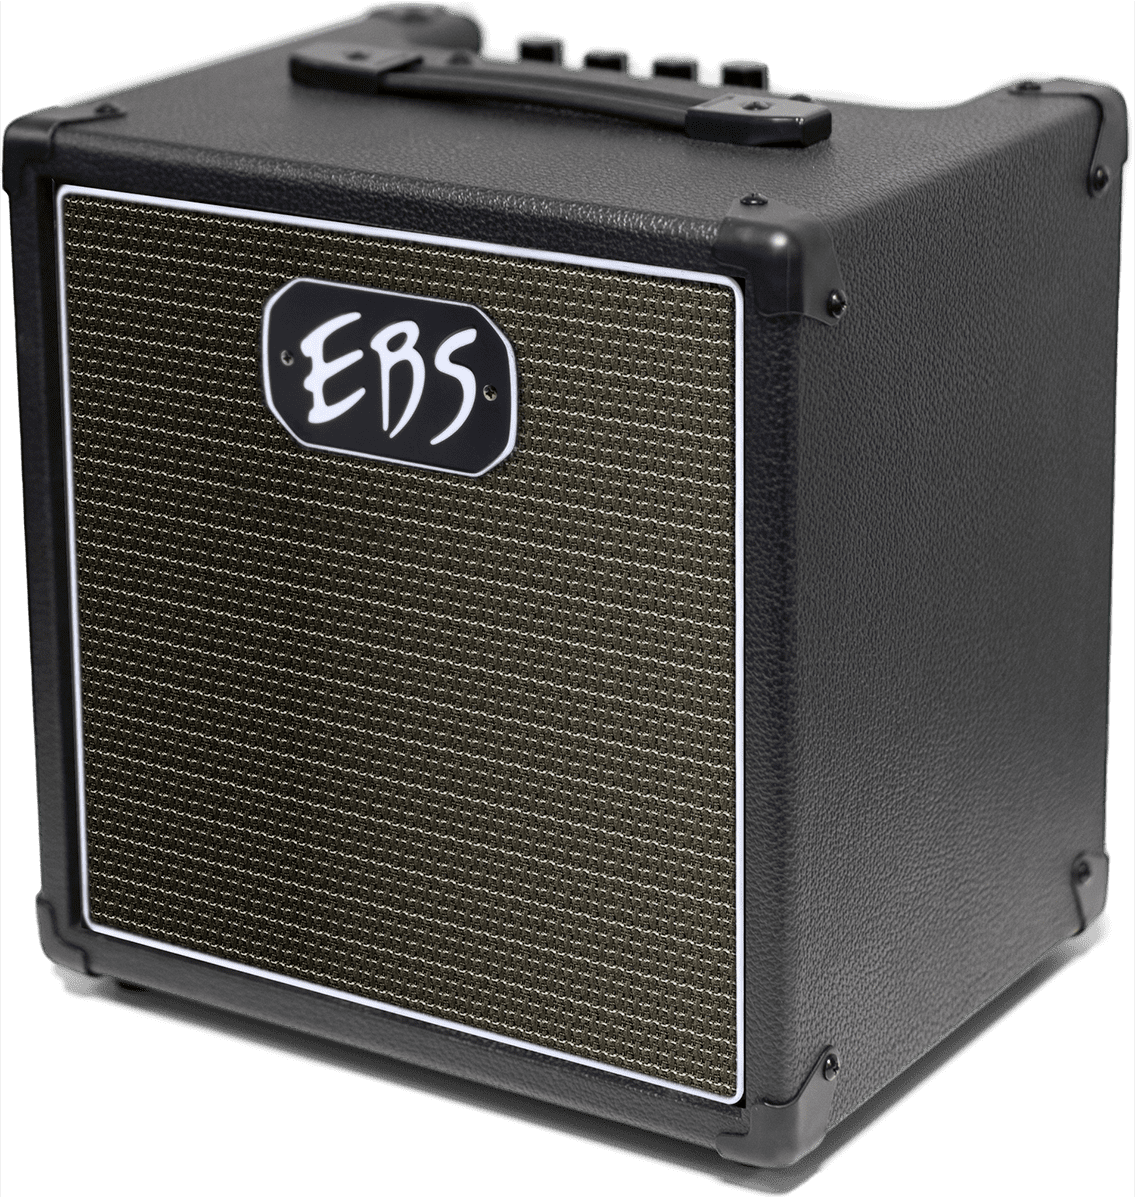 Ebs Session 30 Mk3 1x8 30 W - Bass Combo - Main picture